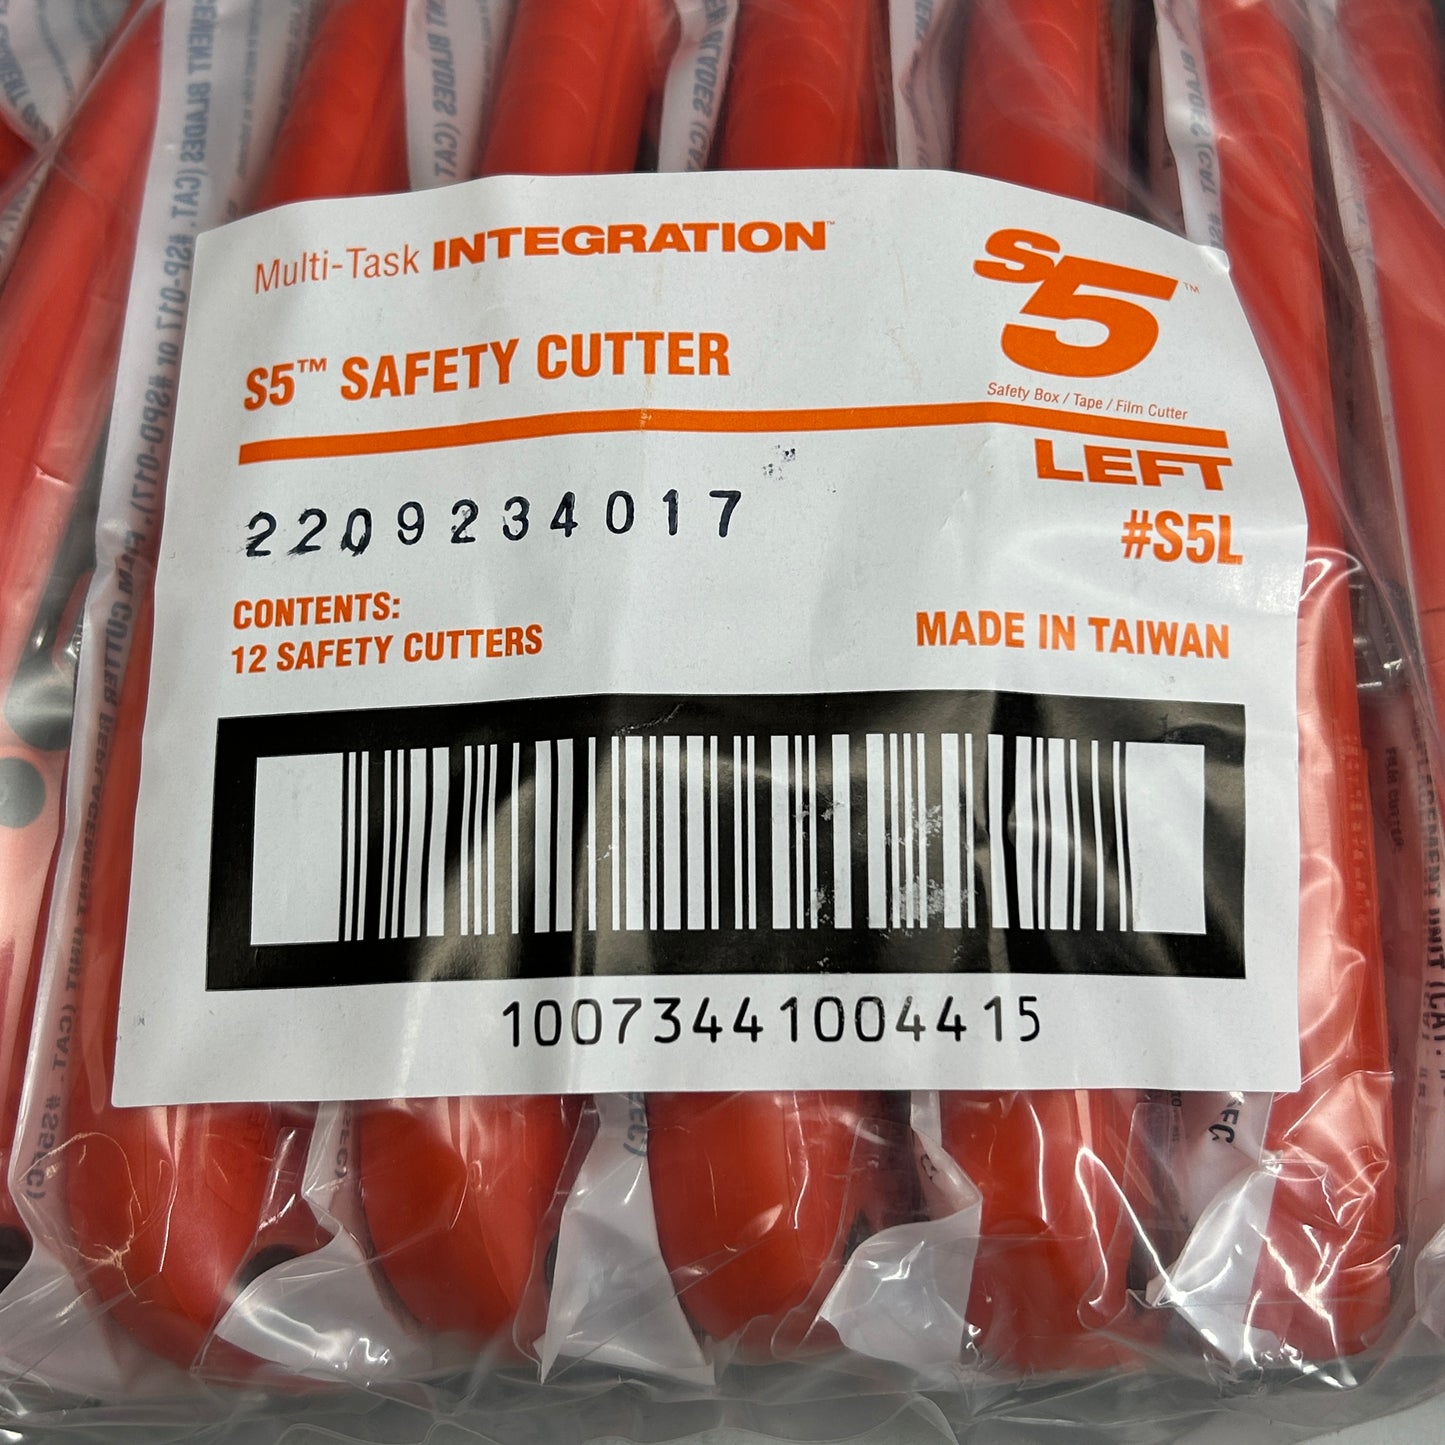 PACIFIC HANDY CUTTER 12-PACK! Left Handed 3 in 1 Safety Cutter (New)